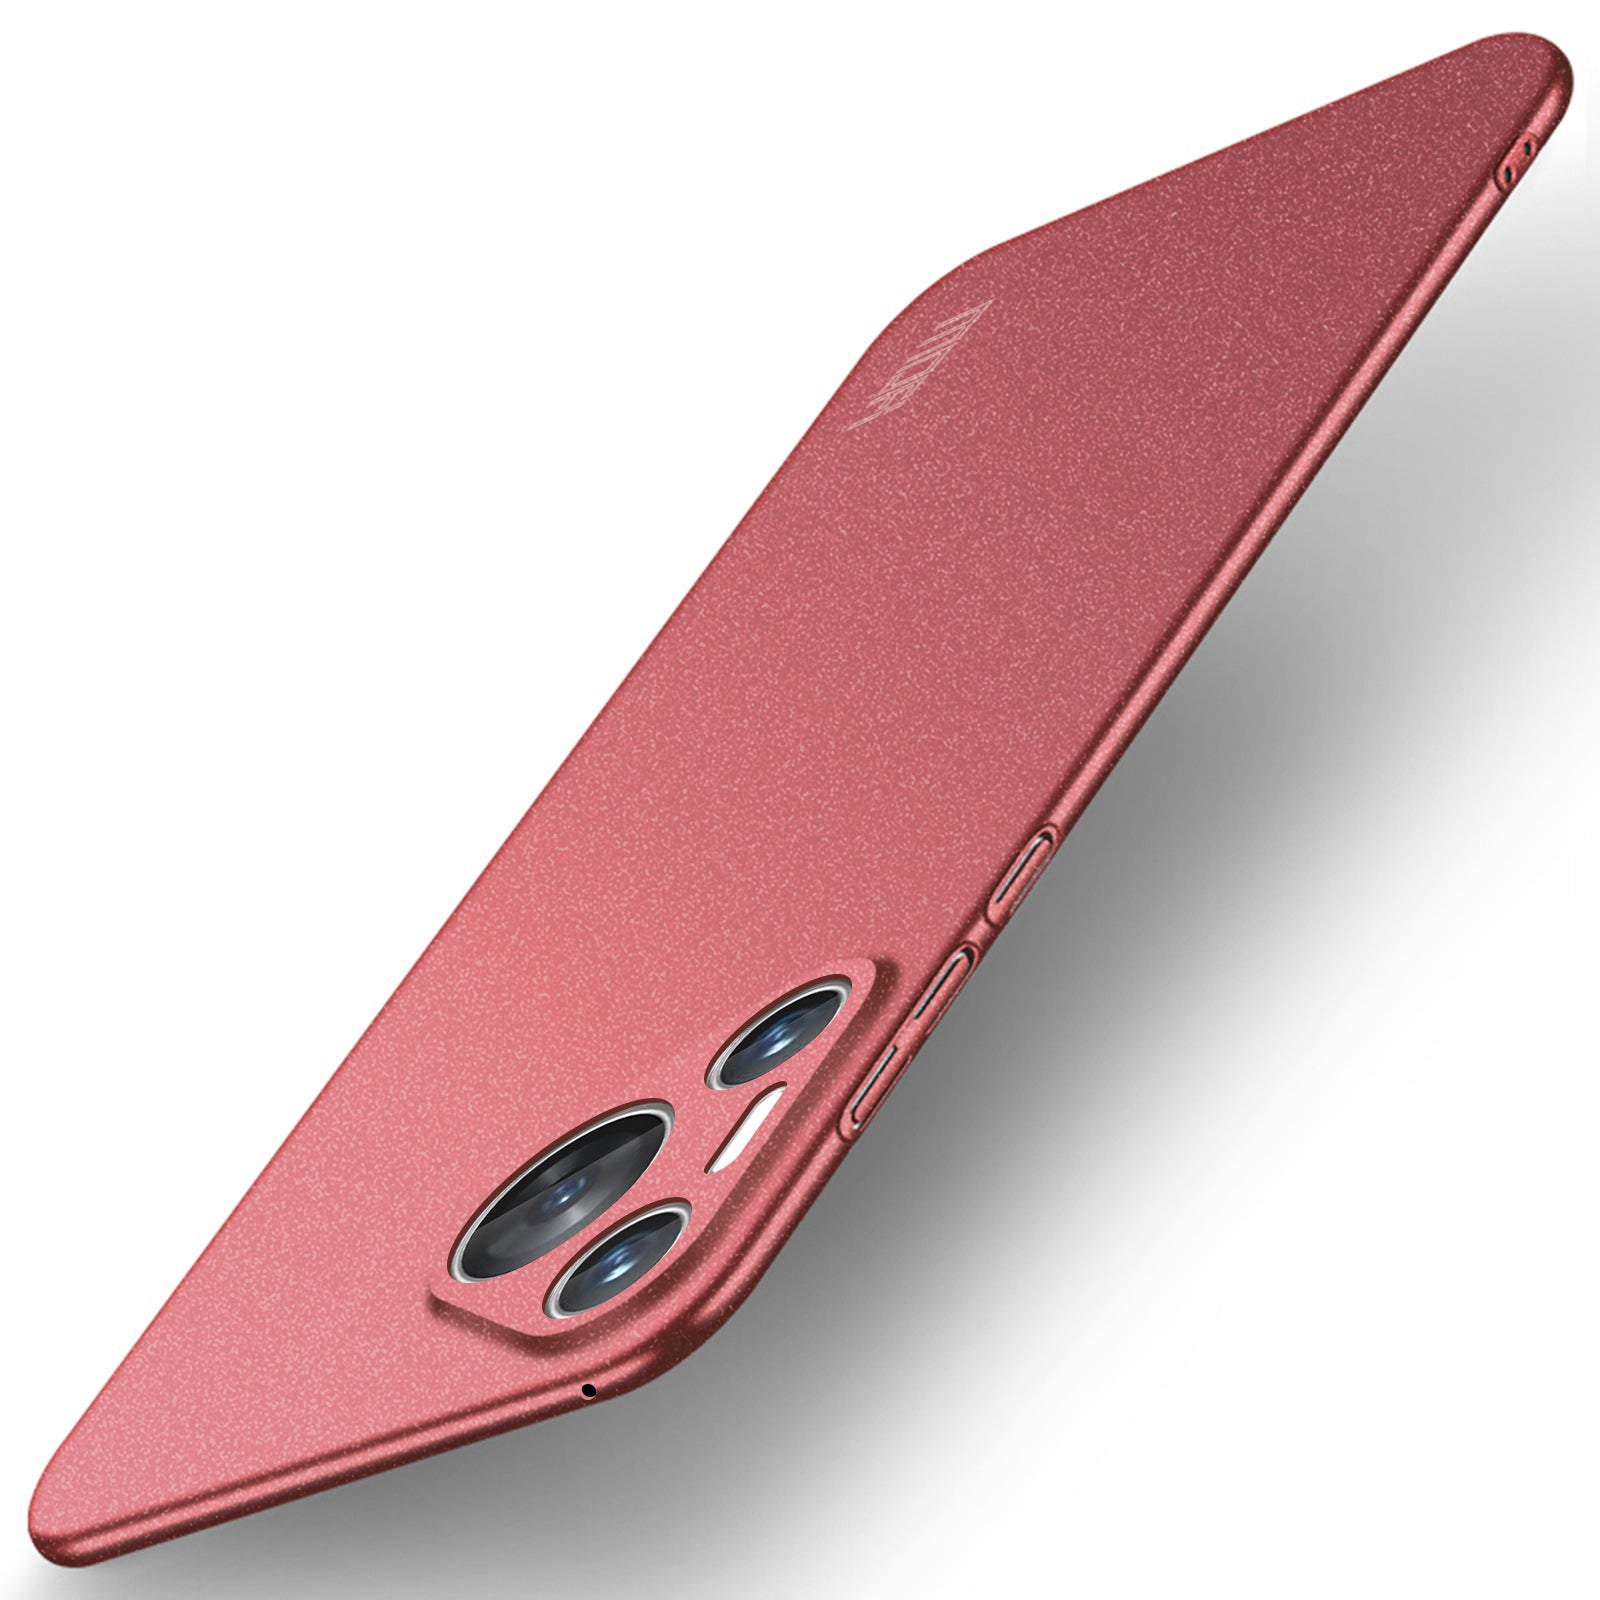 MOFI Shield Matte Series for Huawei Pura 70 Pro / 70 Pro+ Case Hard PC Protective Phone Cover - Red